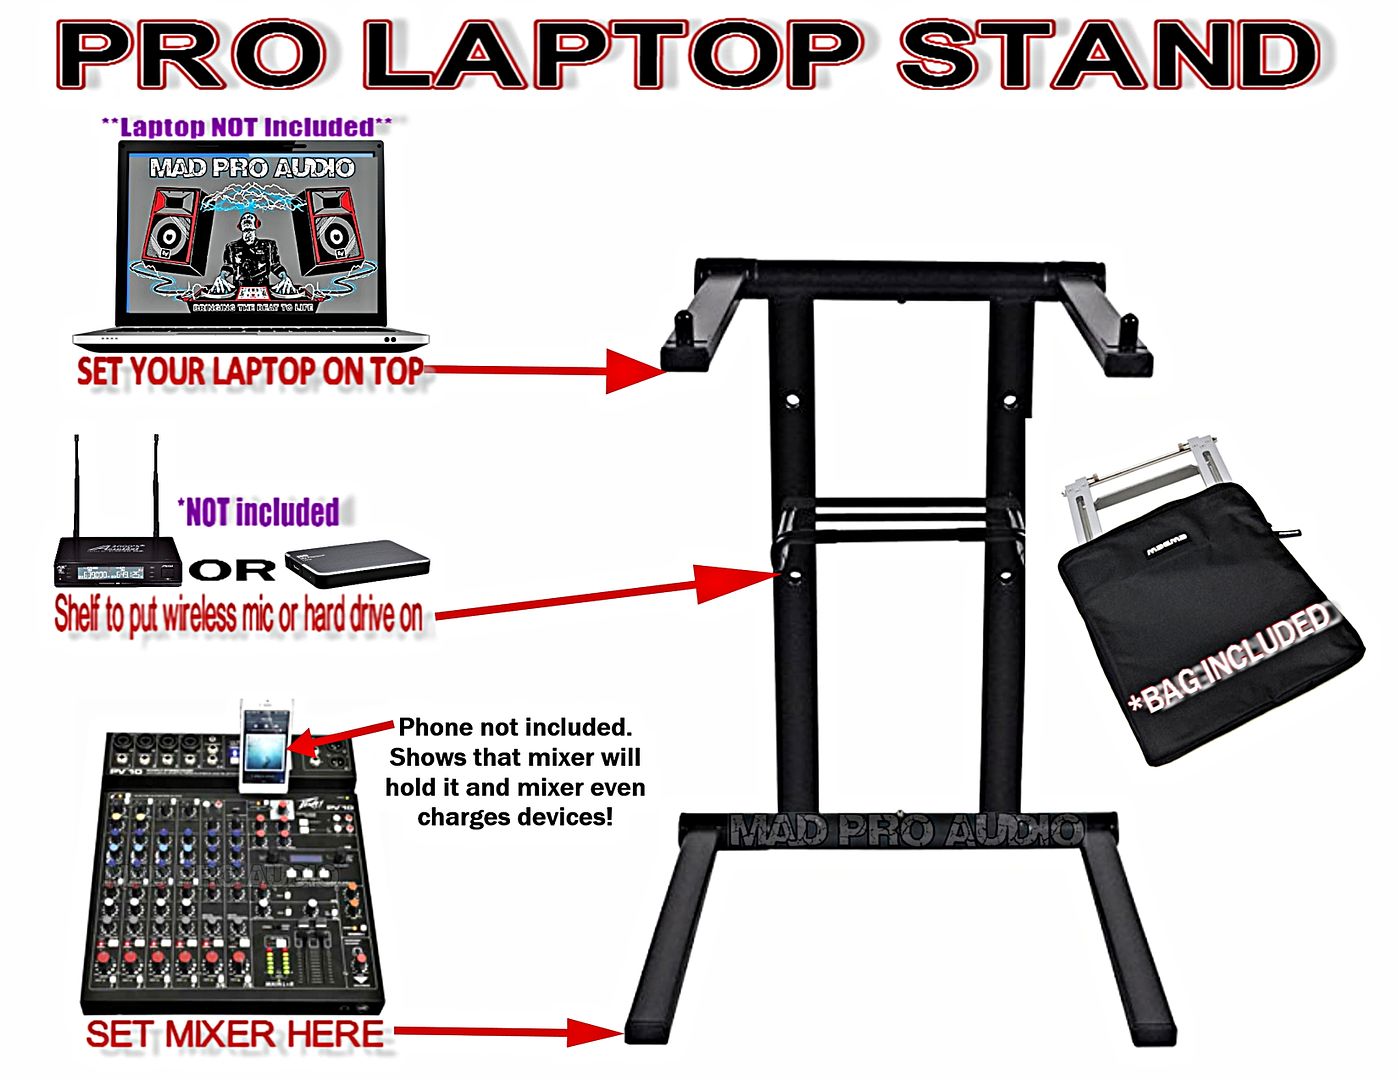 dj laptop stand  laptop stand prox stand xstaticpro by Madproaudio